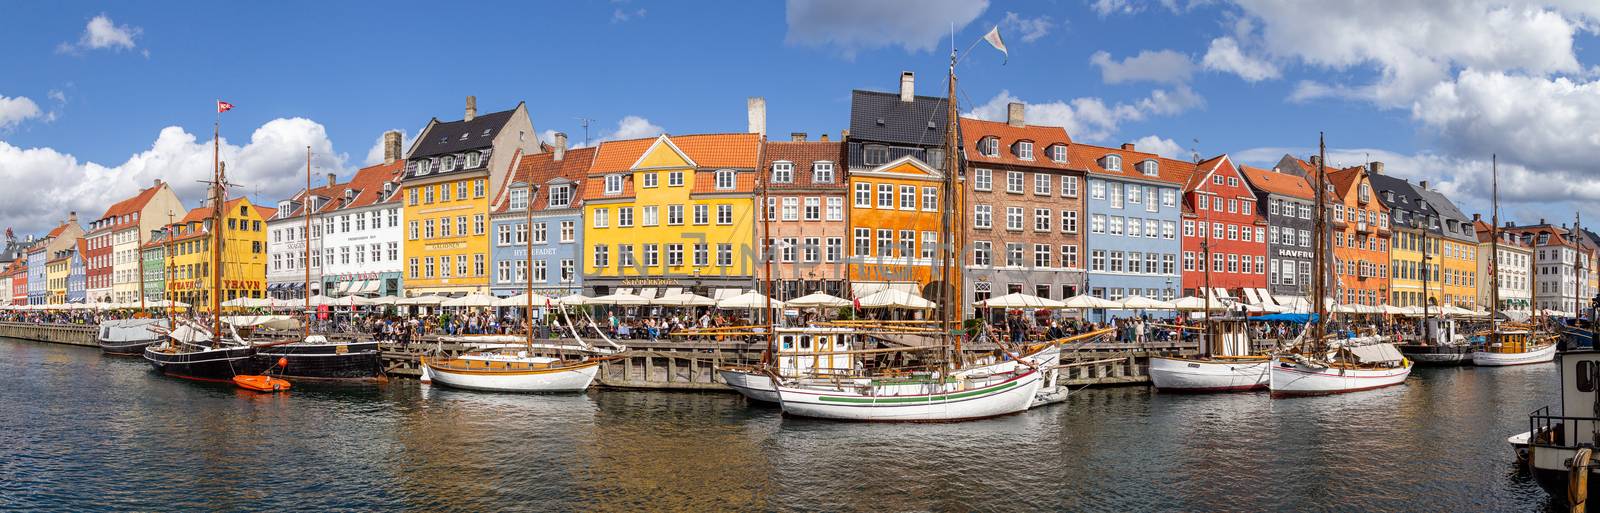 Panoramic view of famous Nyhavn district in Copenhagen, Denmark by oliverfoerstner